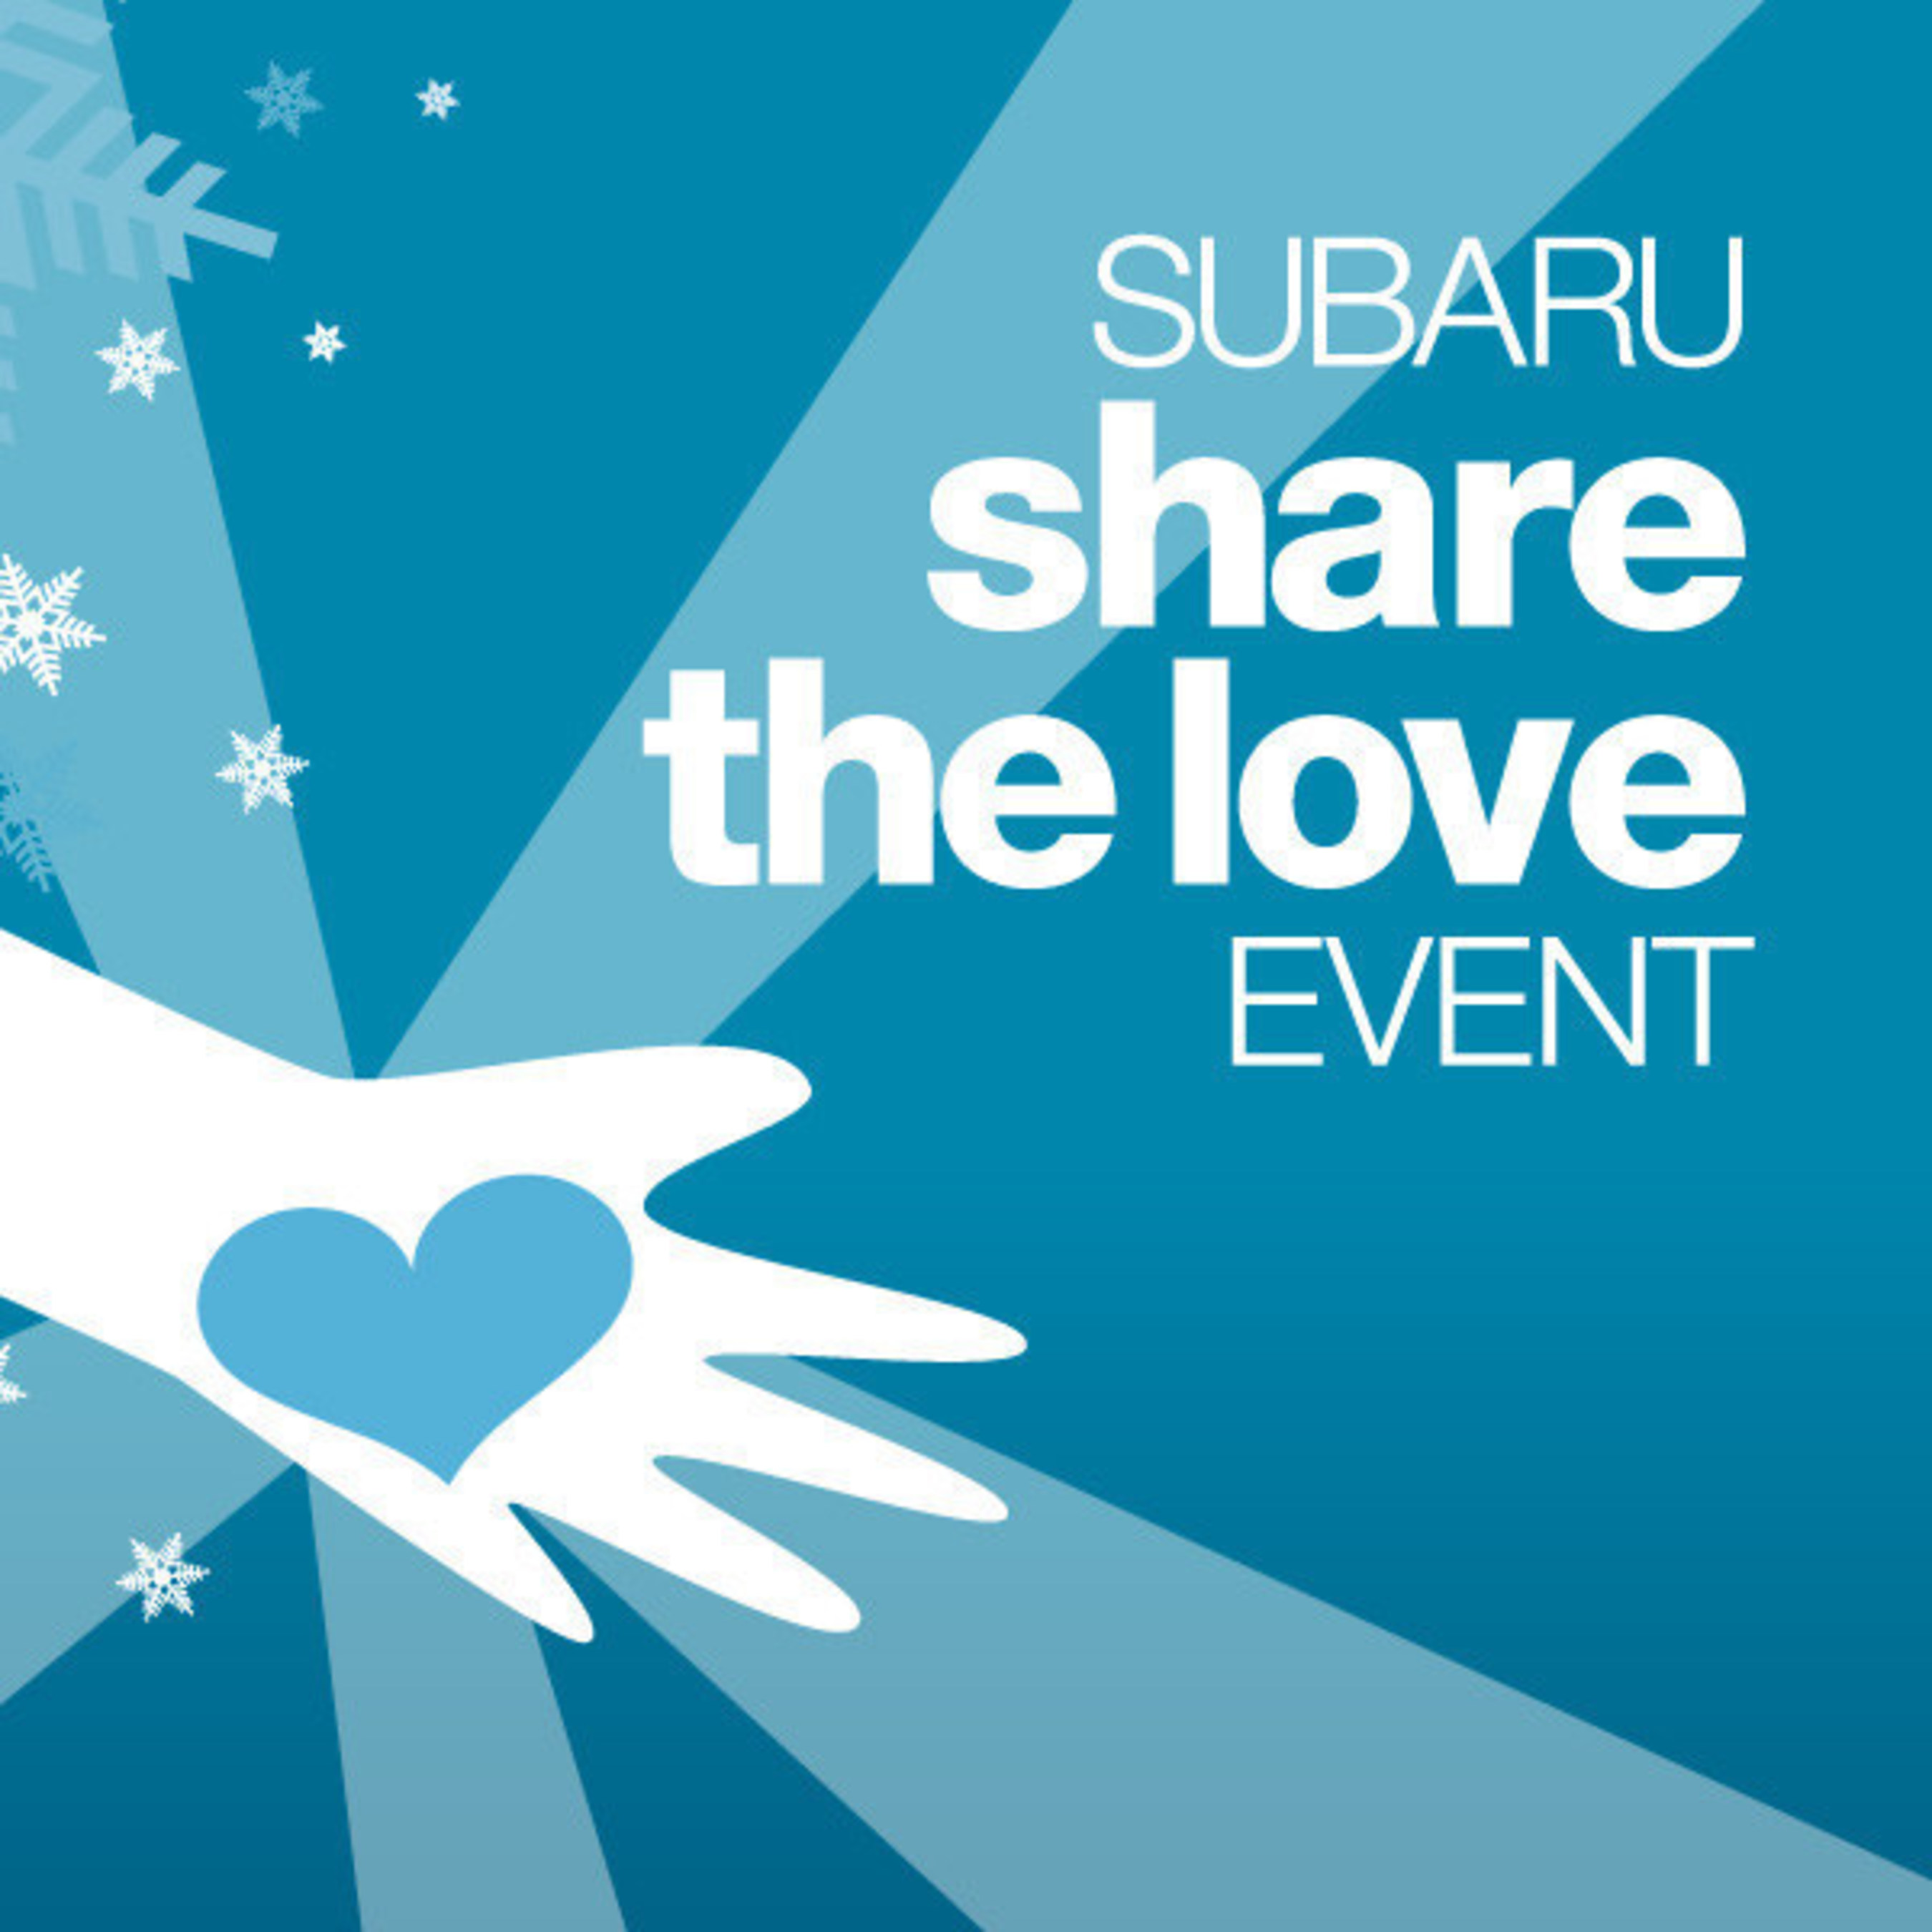 Subaru Share the Love Event Returns for its Eighth Year. 2015 Charitable Partners: ASPCA(R), Make-A-Wish(R), Meals On Wheels America(R) and National Park Foundation.